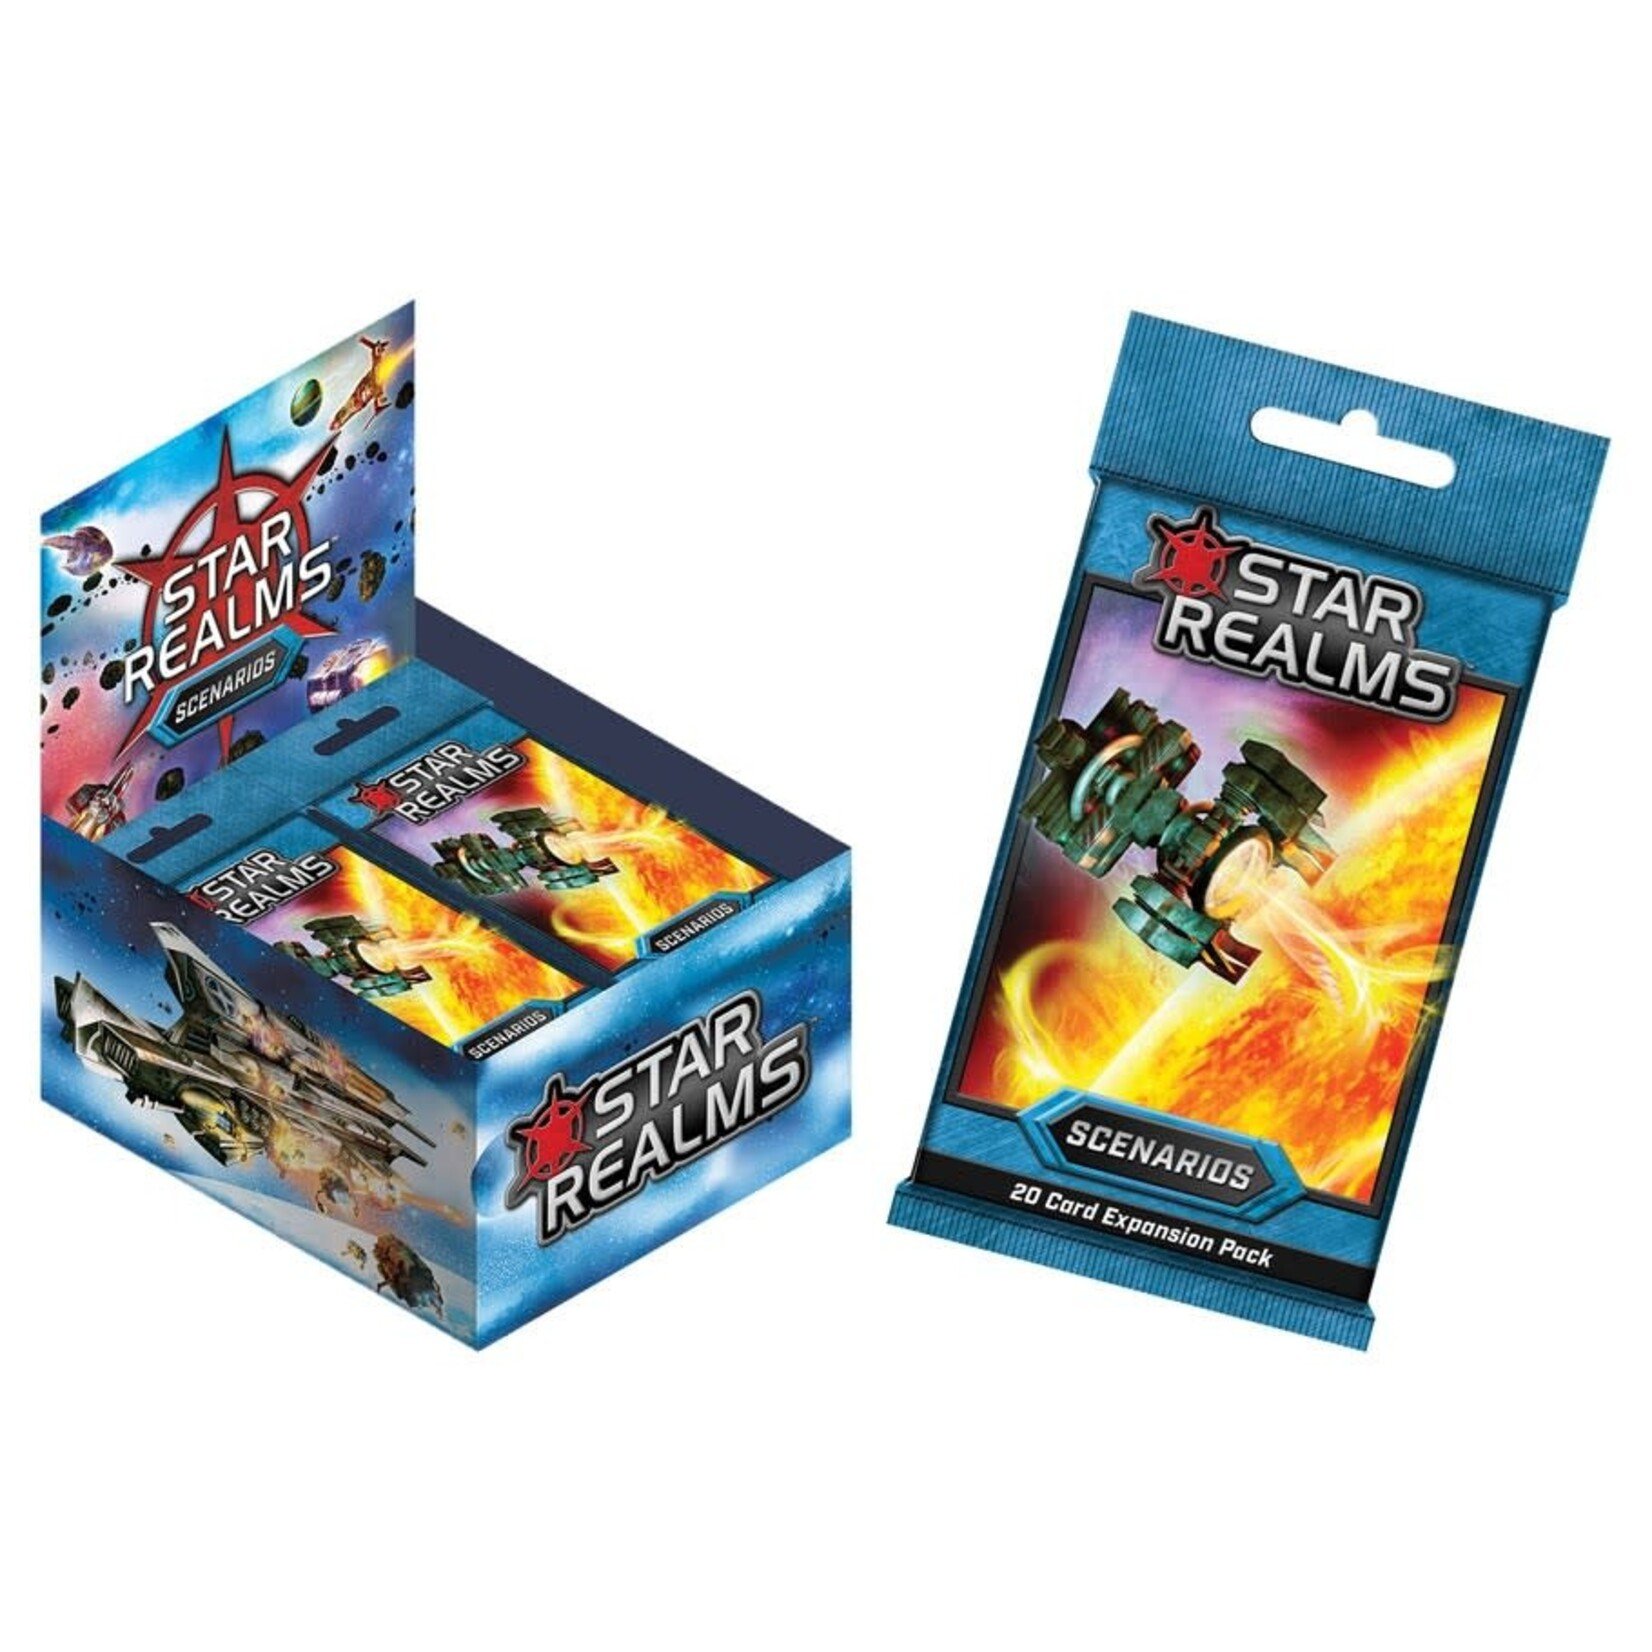 Wise Wizard Games, LLC Star Realms: Scenarios Expansion Pack